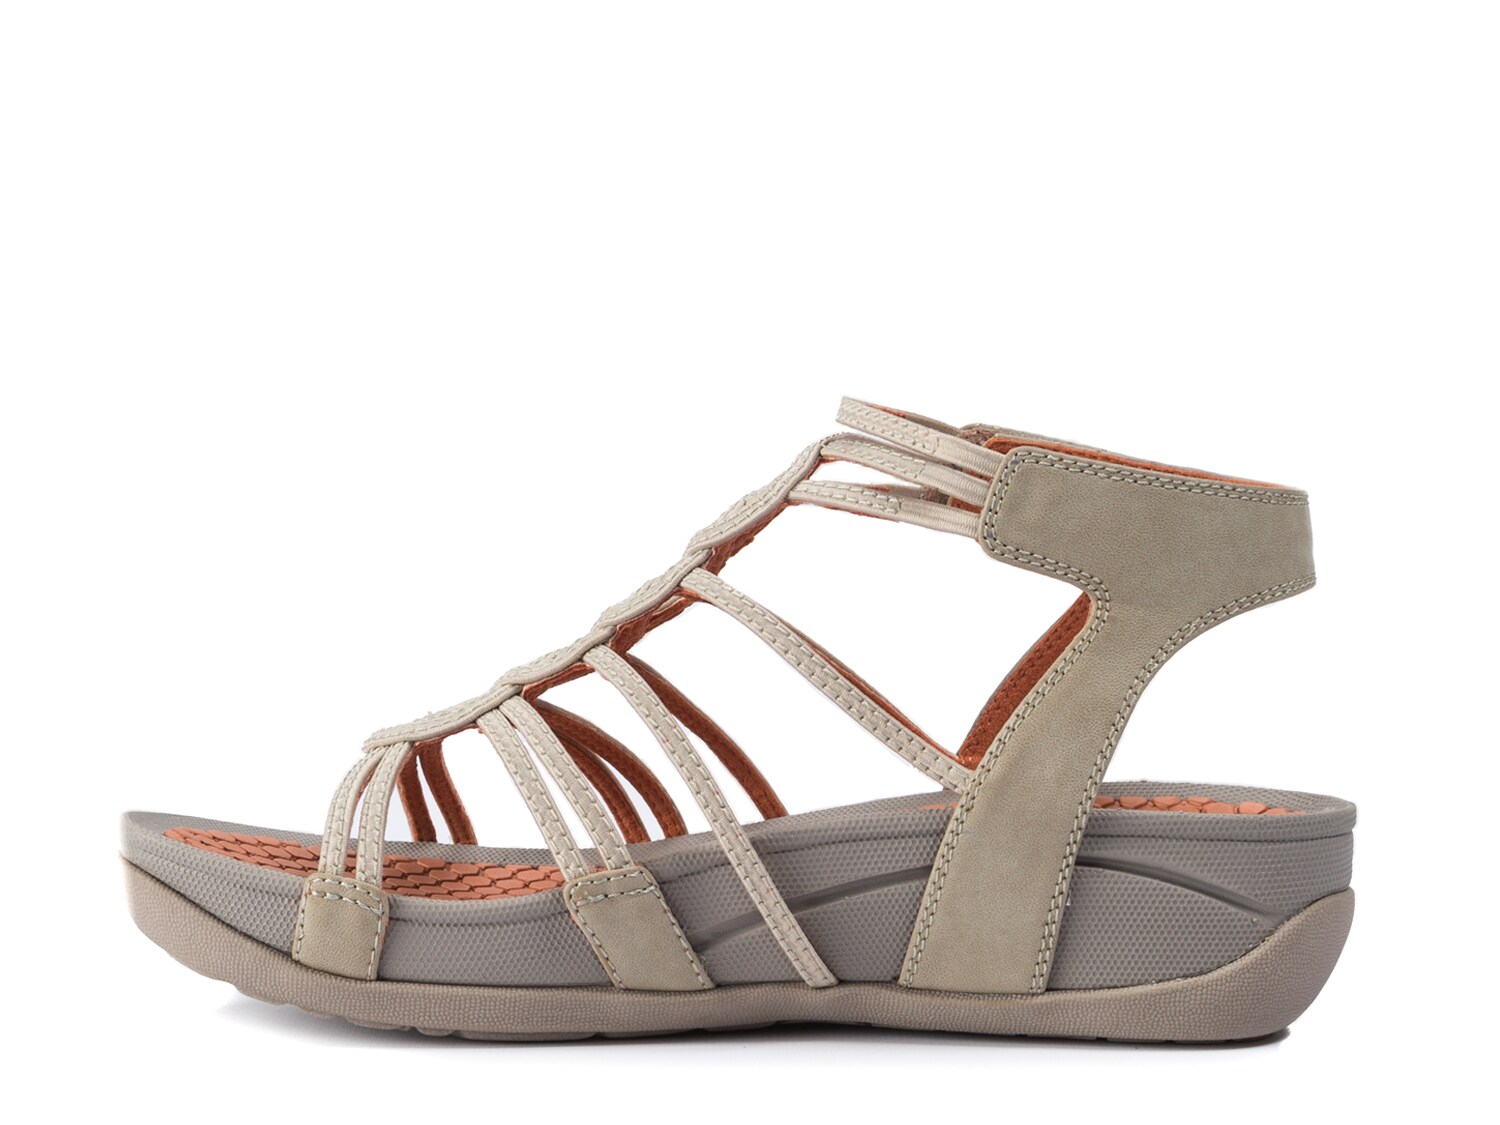 bare traps delly wedge sandal